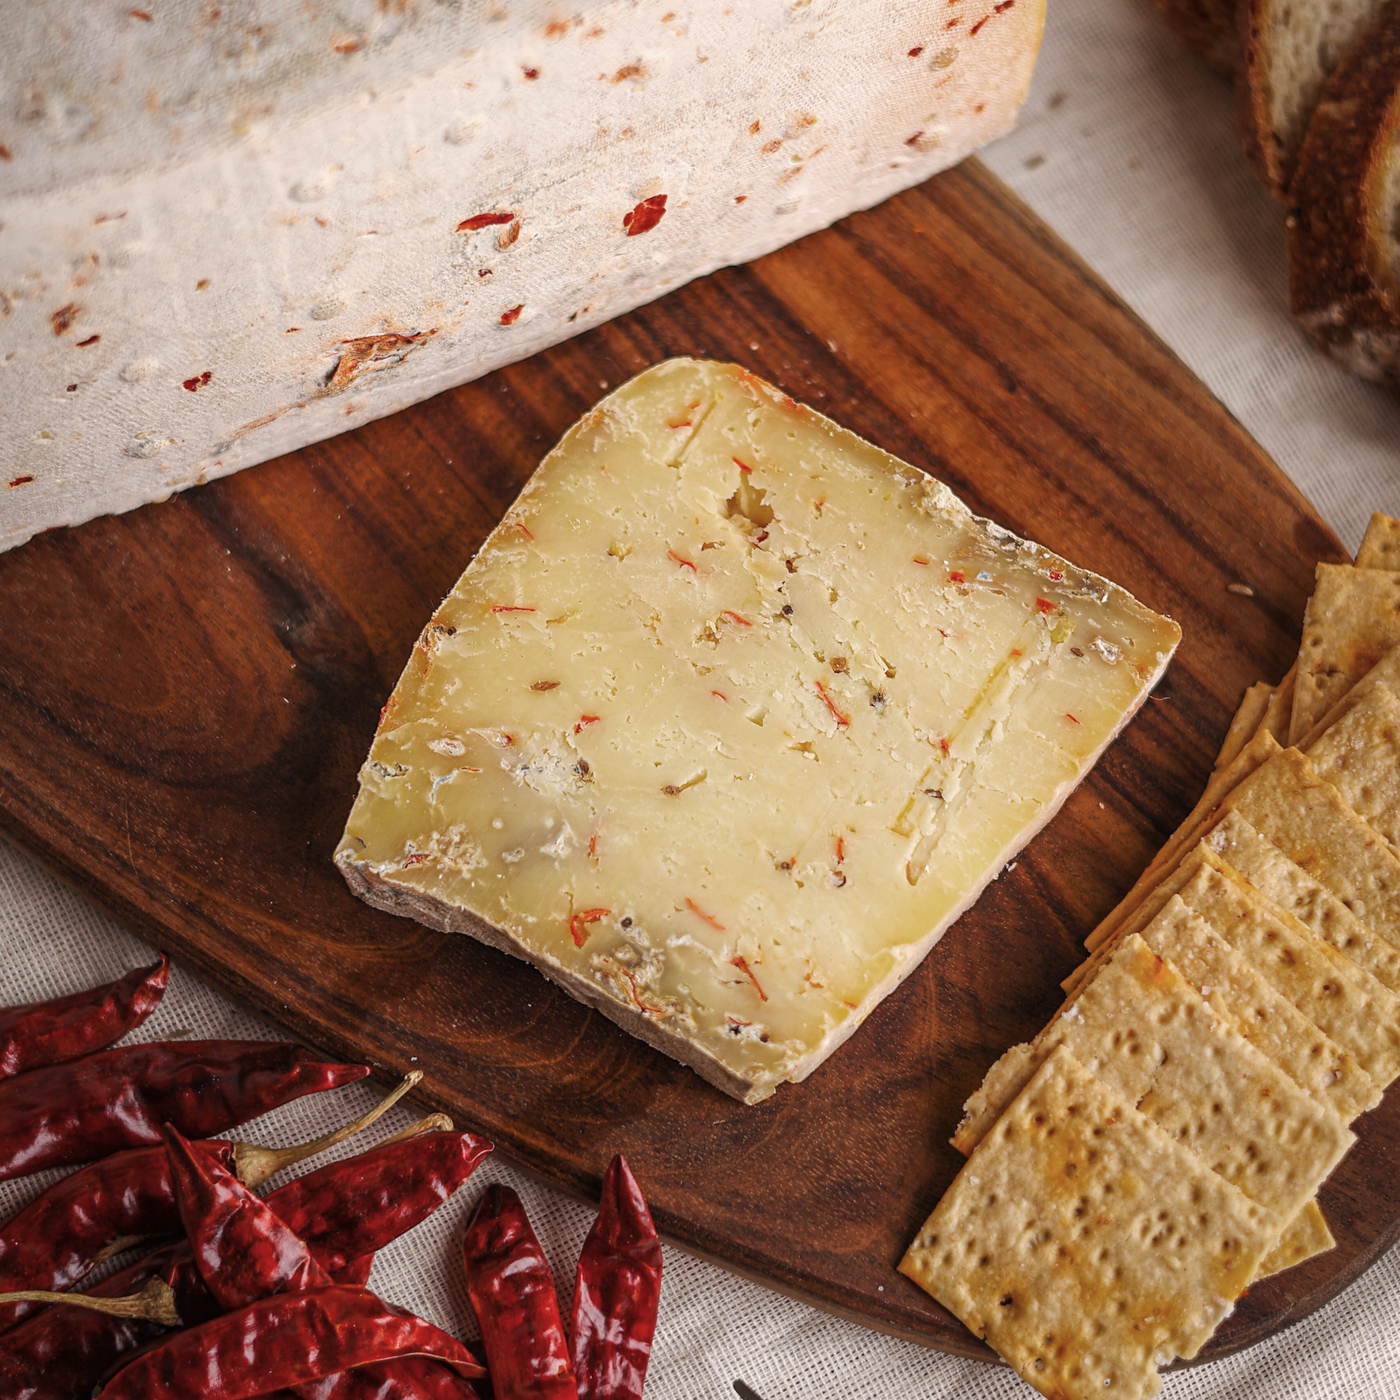 Käse Cumin & Chilli cheese is a semi-hard milled curd cheese infused with cumin & chili and aged for 6-8 months.